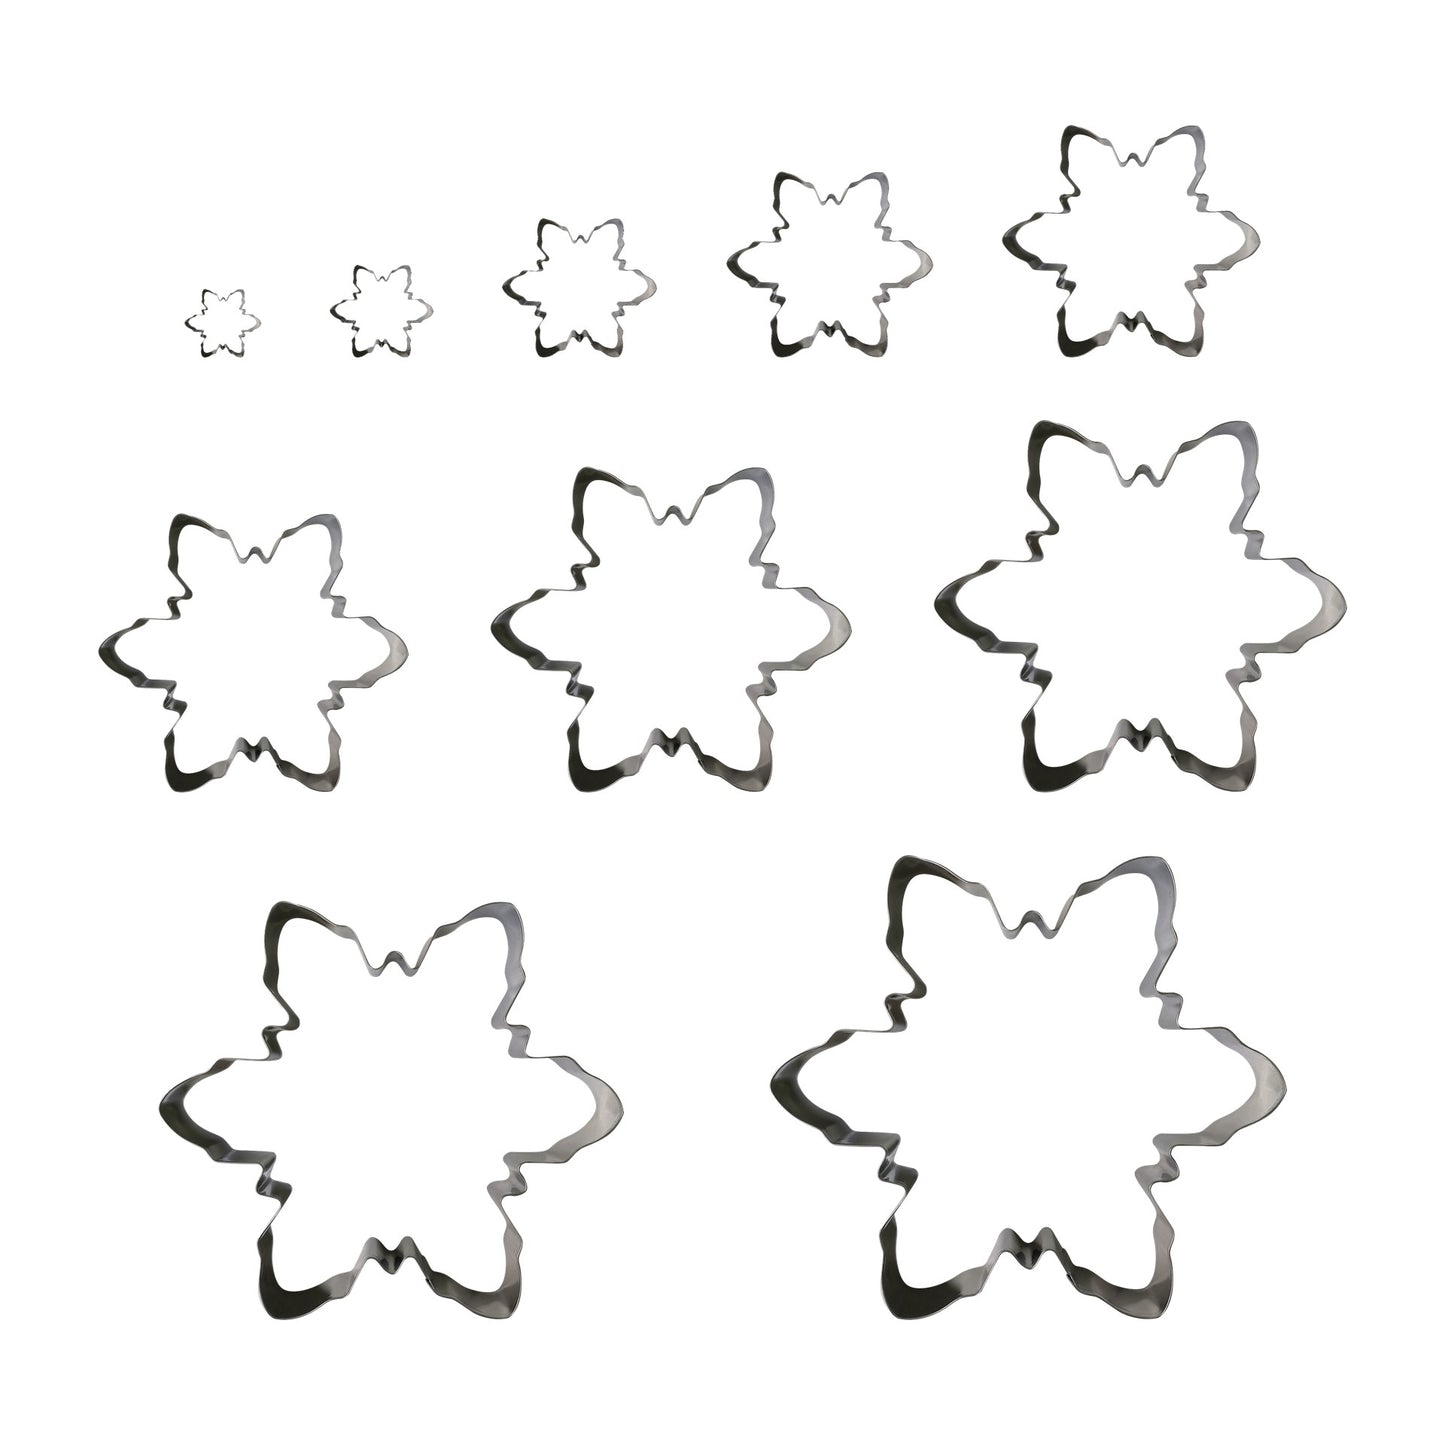 10pc S.S. Snowflake Cookie Cutter Set in Color Box - Rustic Holiday